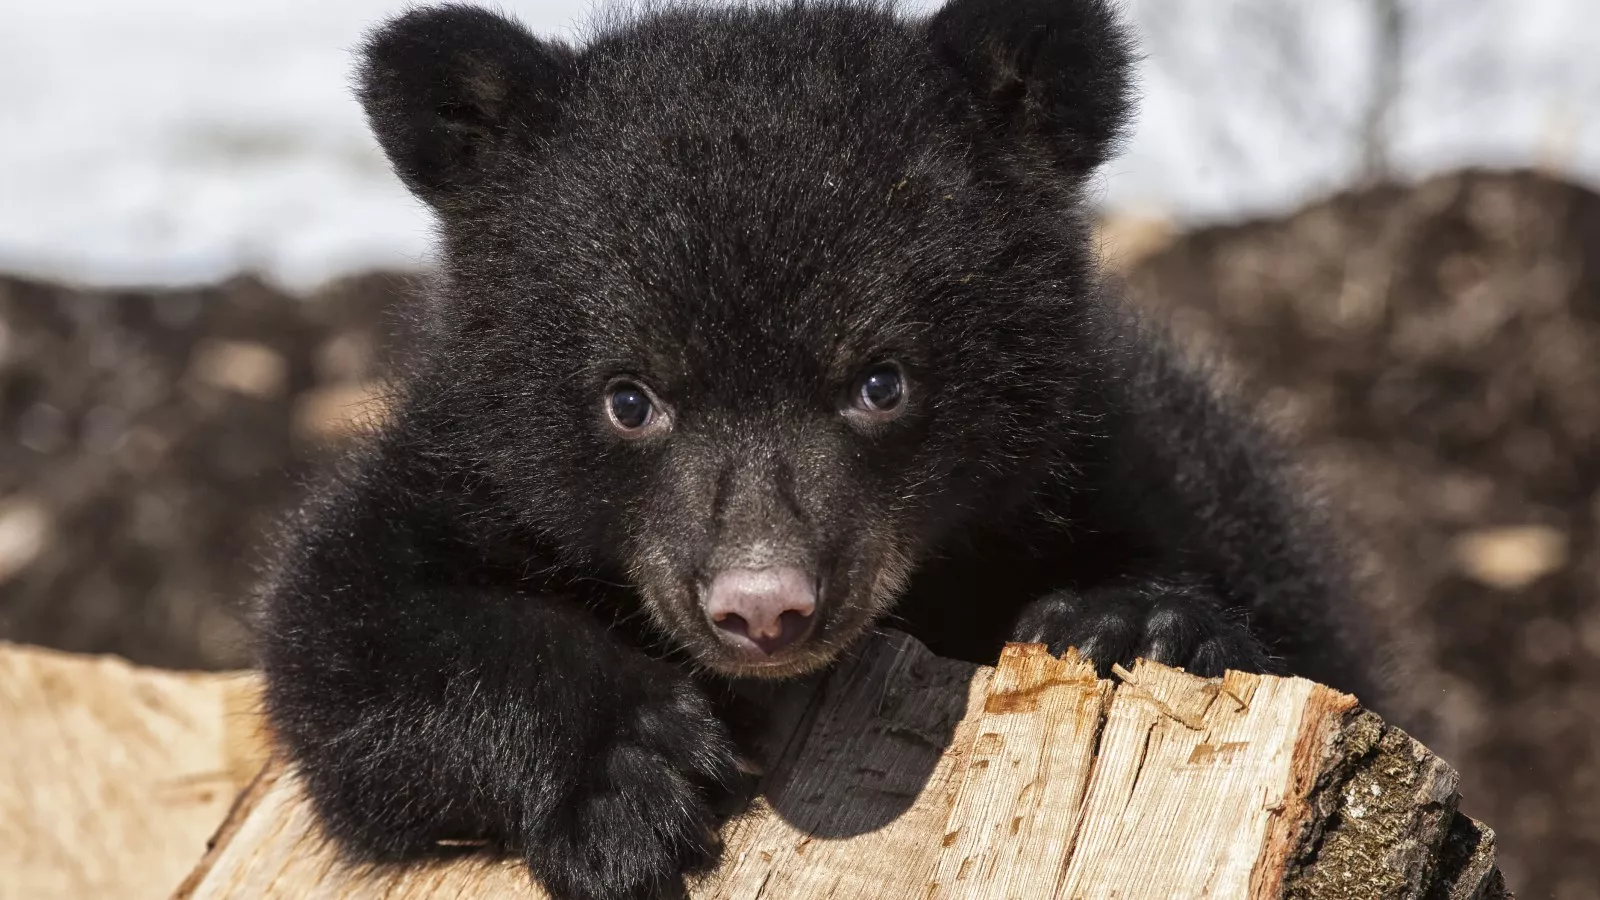 Lonely, Emaciated Bear That Lost Its Mom Dies after Tranquilizer Shot